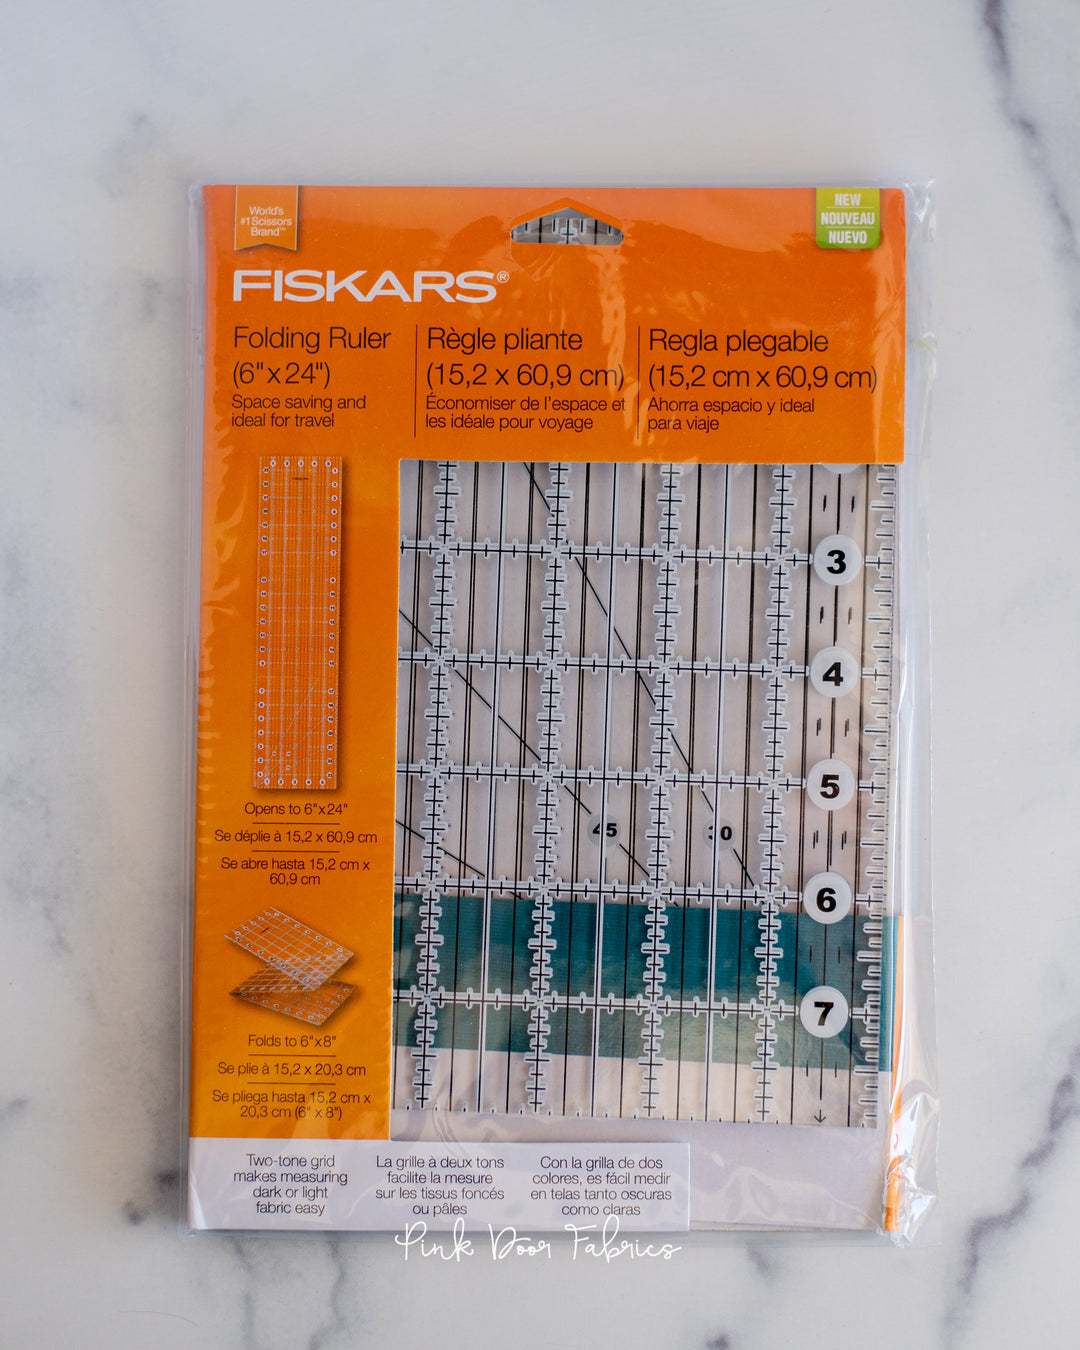 Fiskars Folding Quilters Ruler 6 x 24 great for travel, retreats, compact  storage